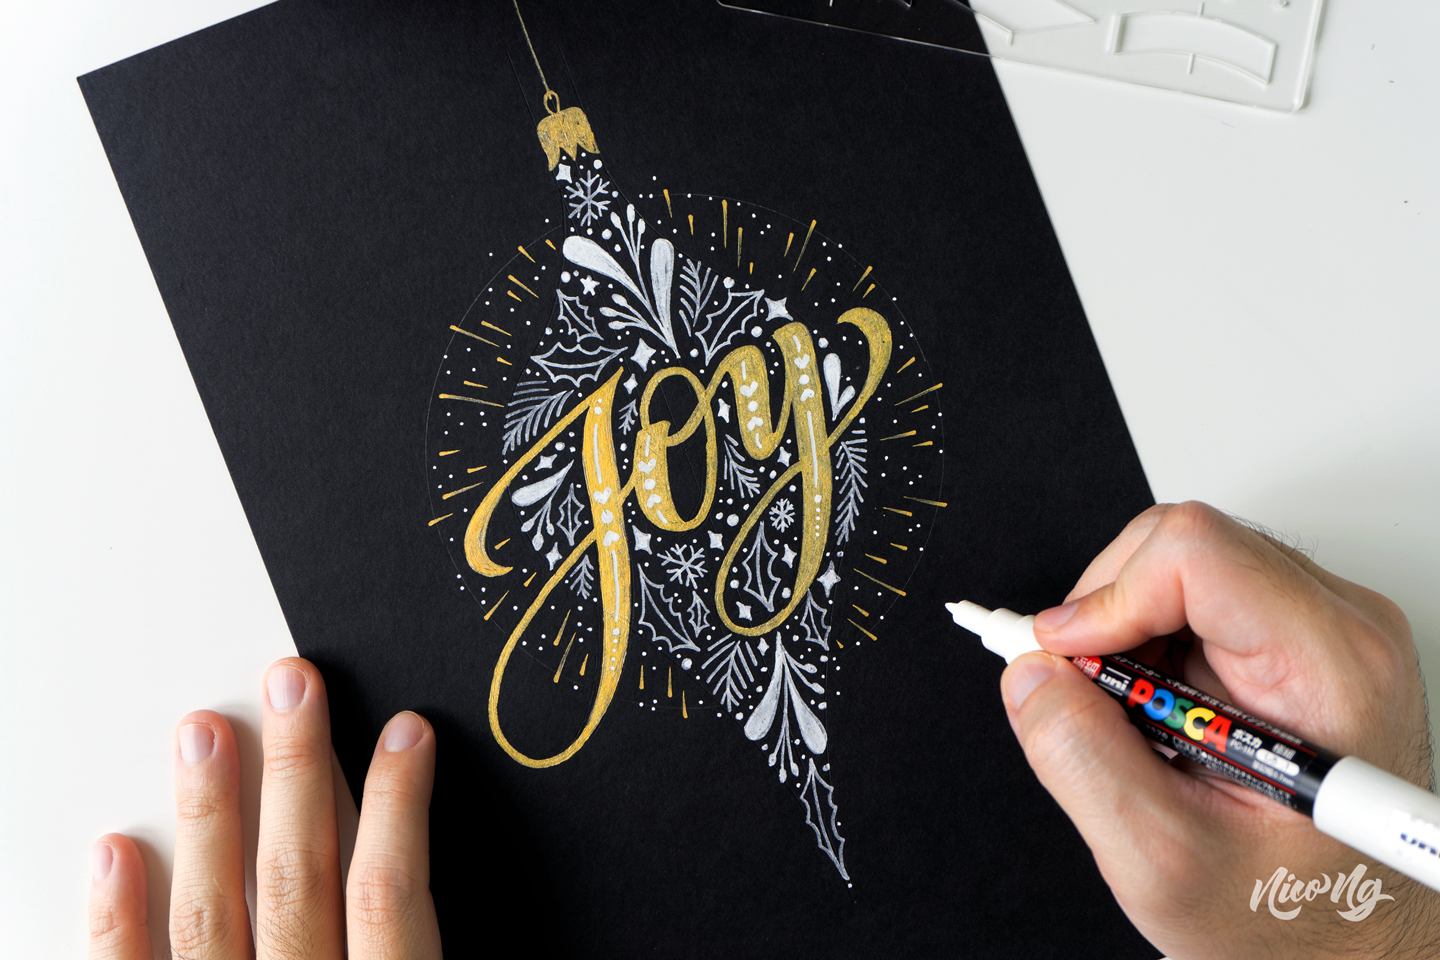 Dazzling Holiday Lettering Tutorial by Nico Ng (Includes Free Printable)